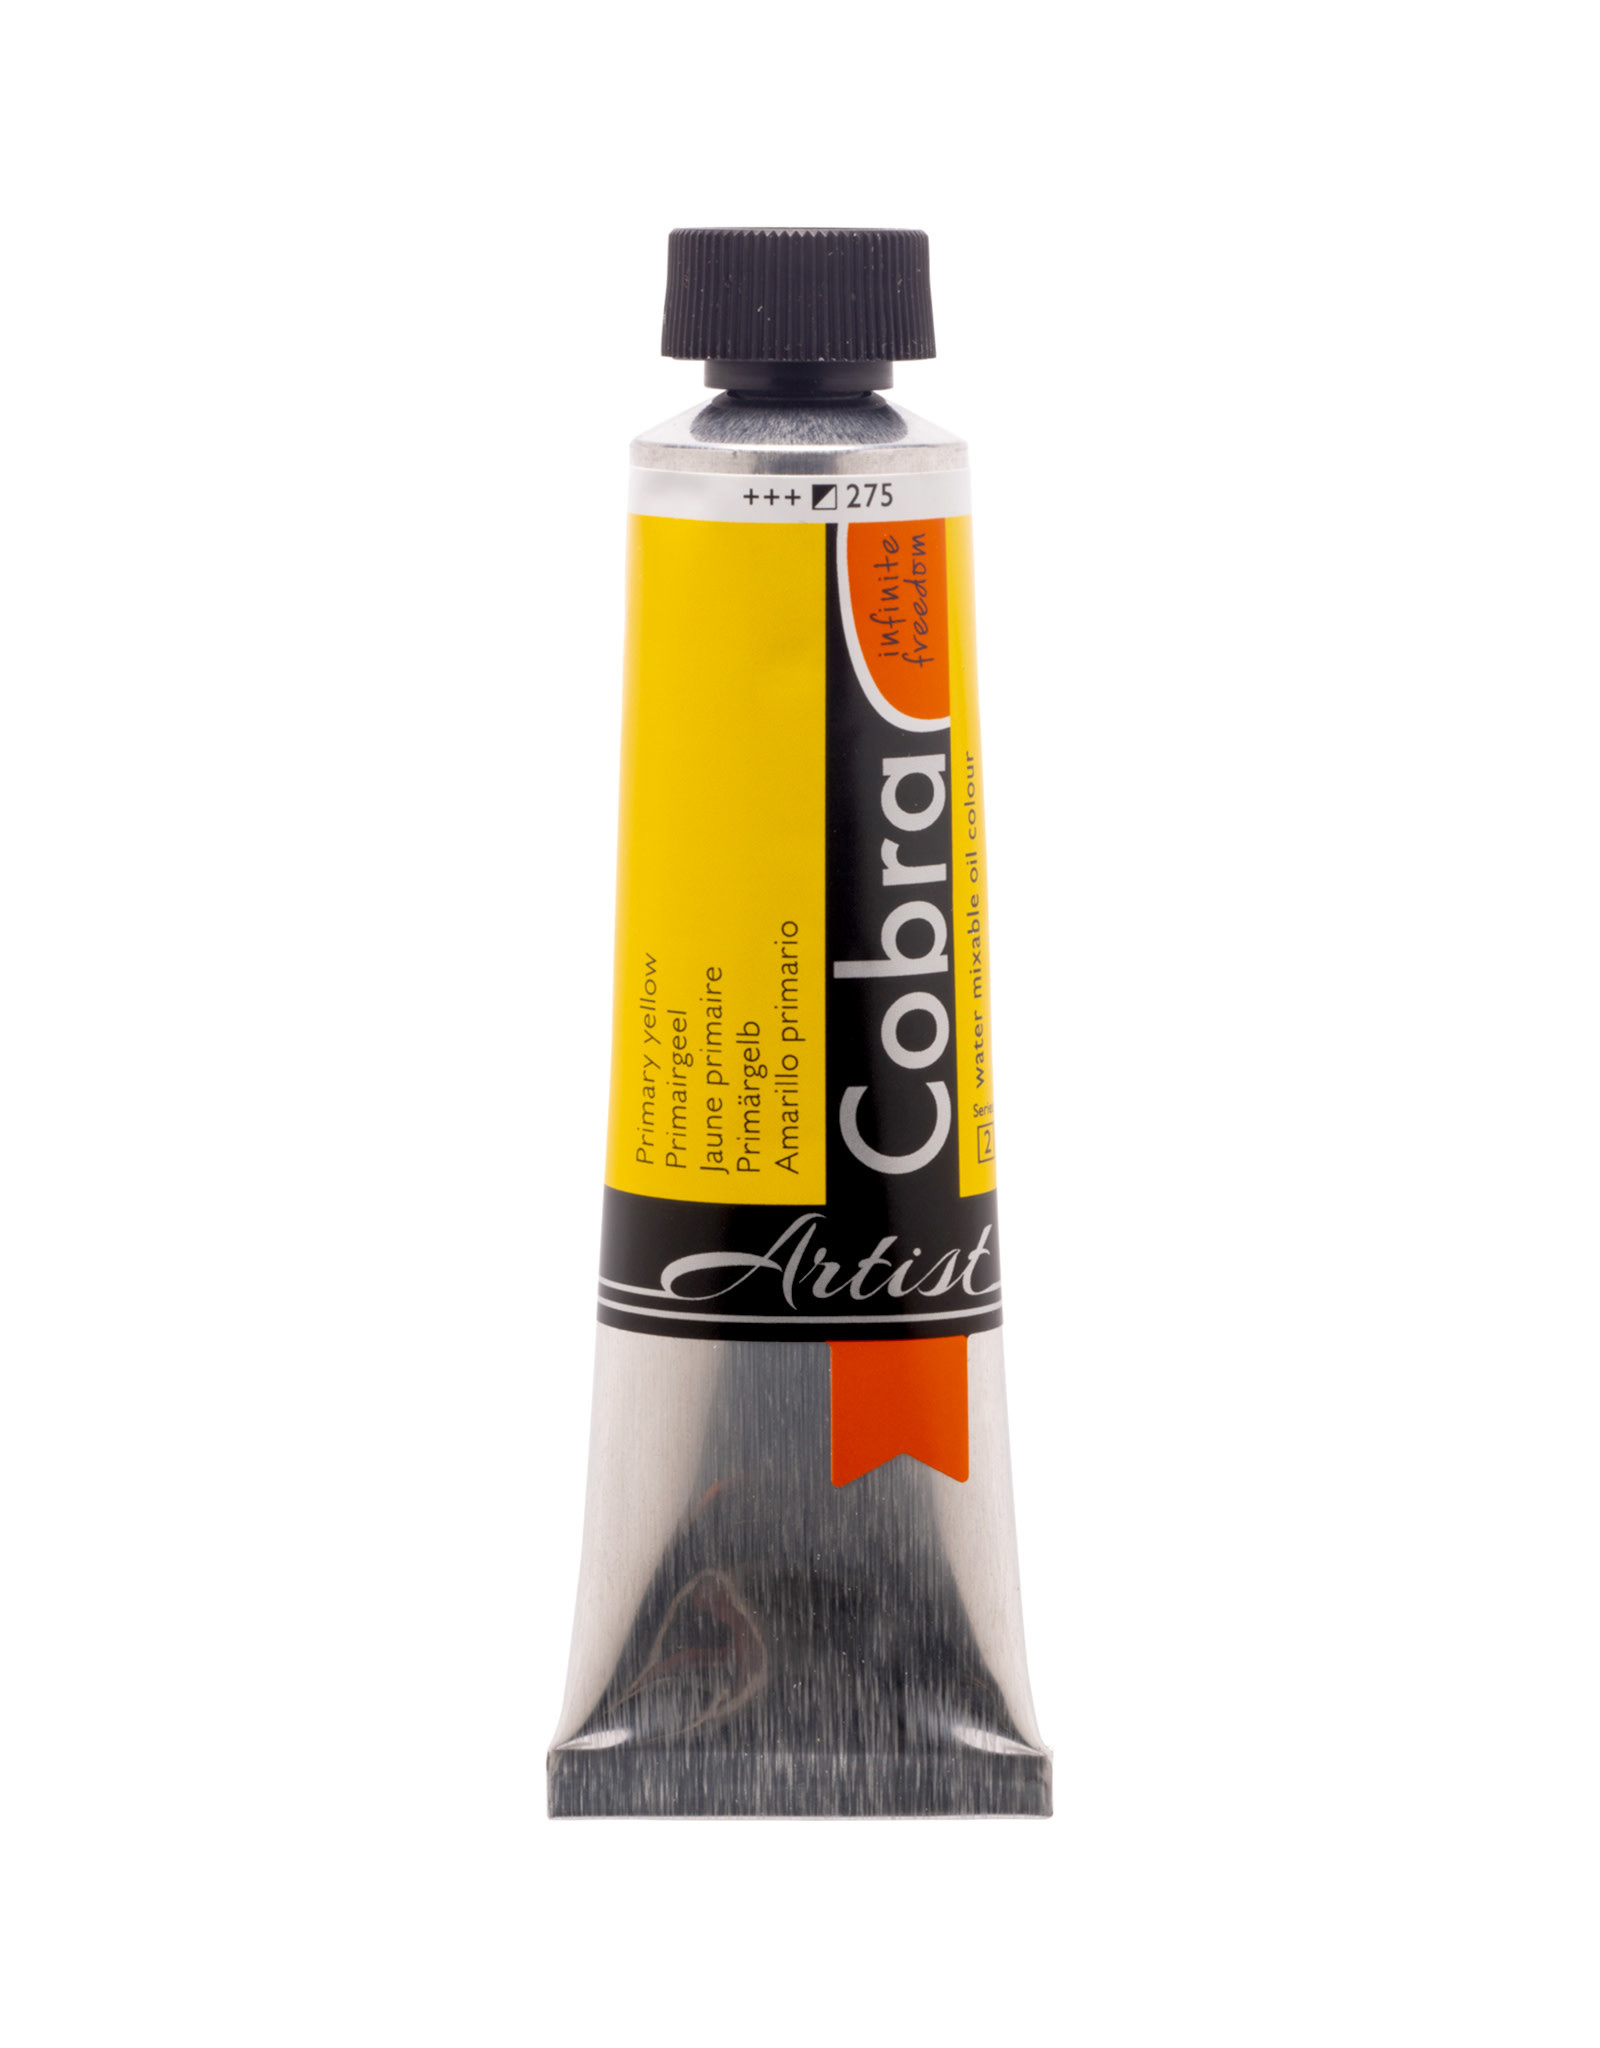 Royal Talens Cobra Water Mixable Artist Oils,  Primary Yellow 40ml